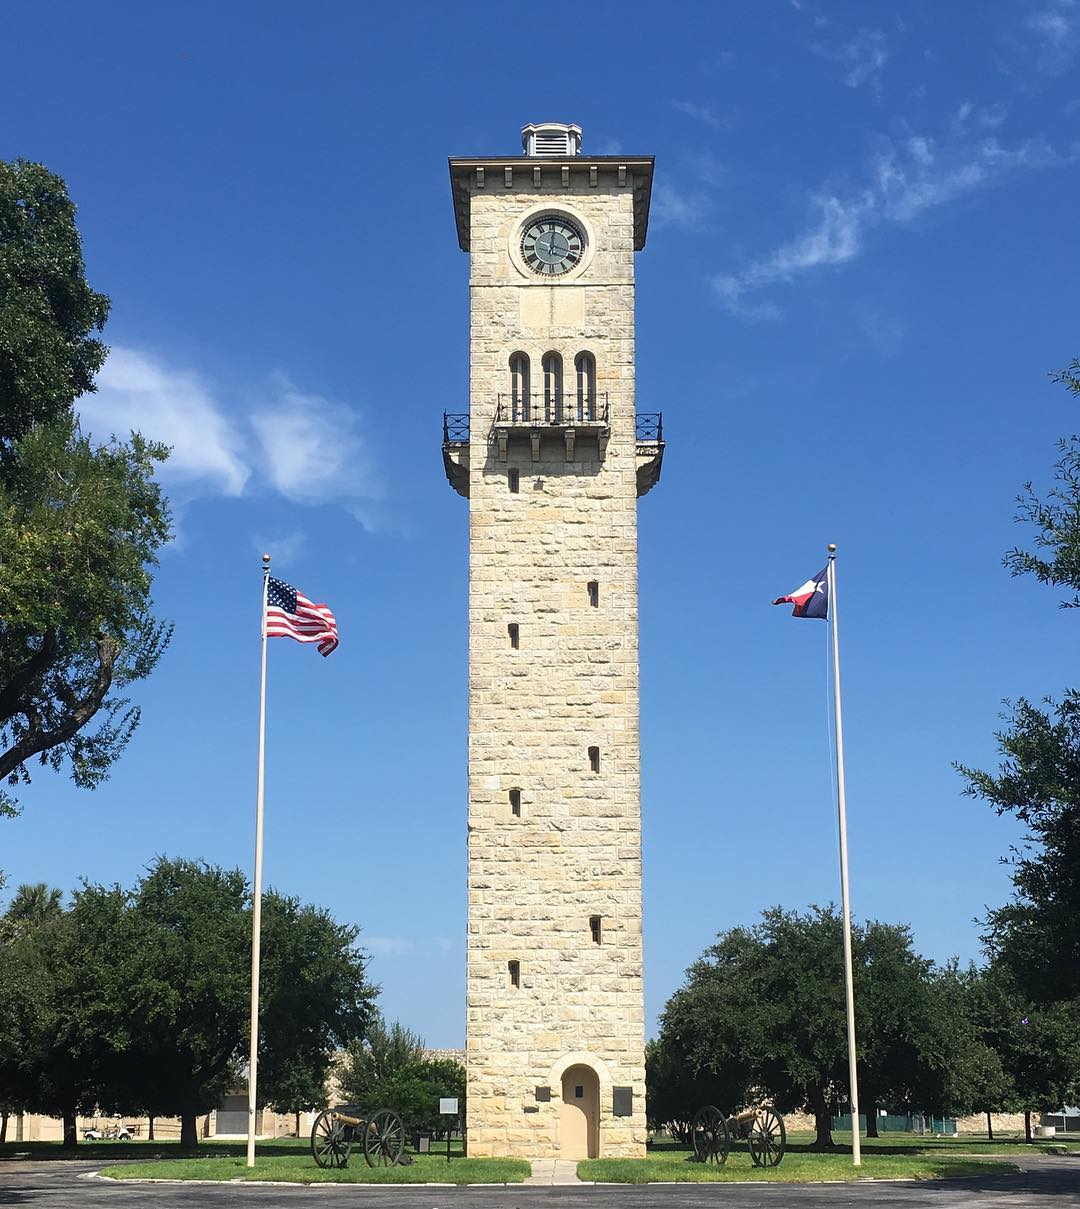 Large tower on a sunny day at Fort Sam Houston Army Base. Photo by Instagram user @_dkerr